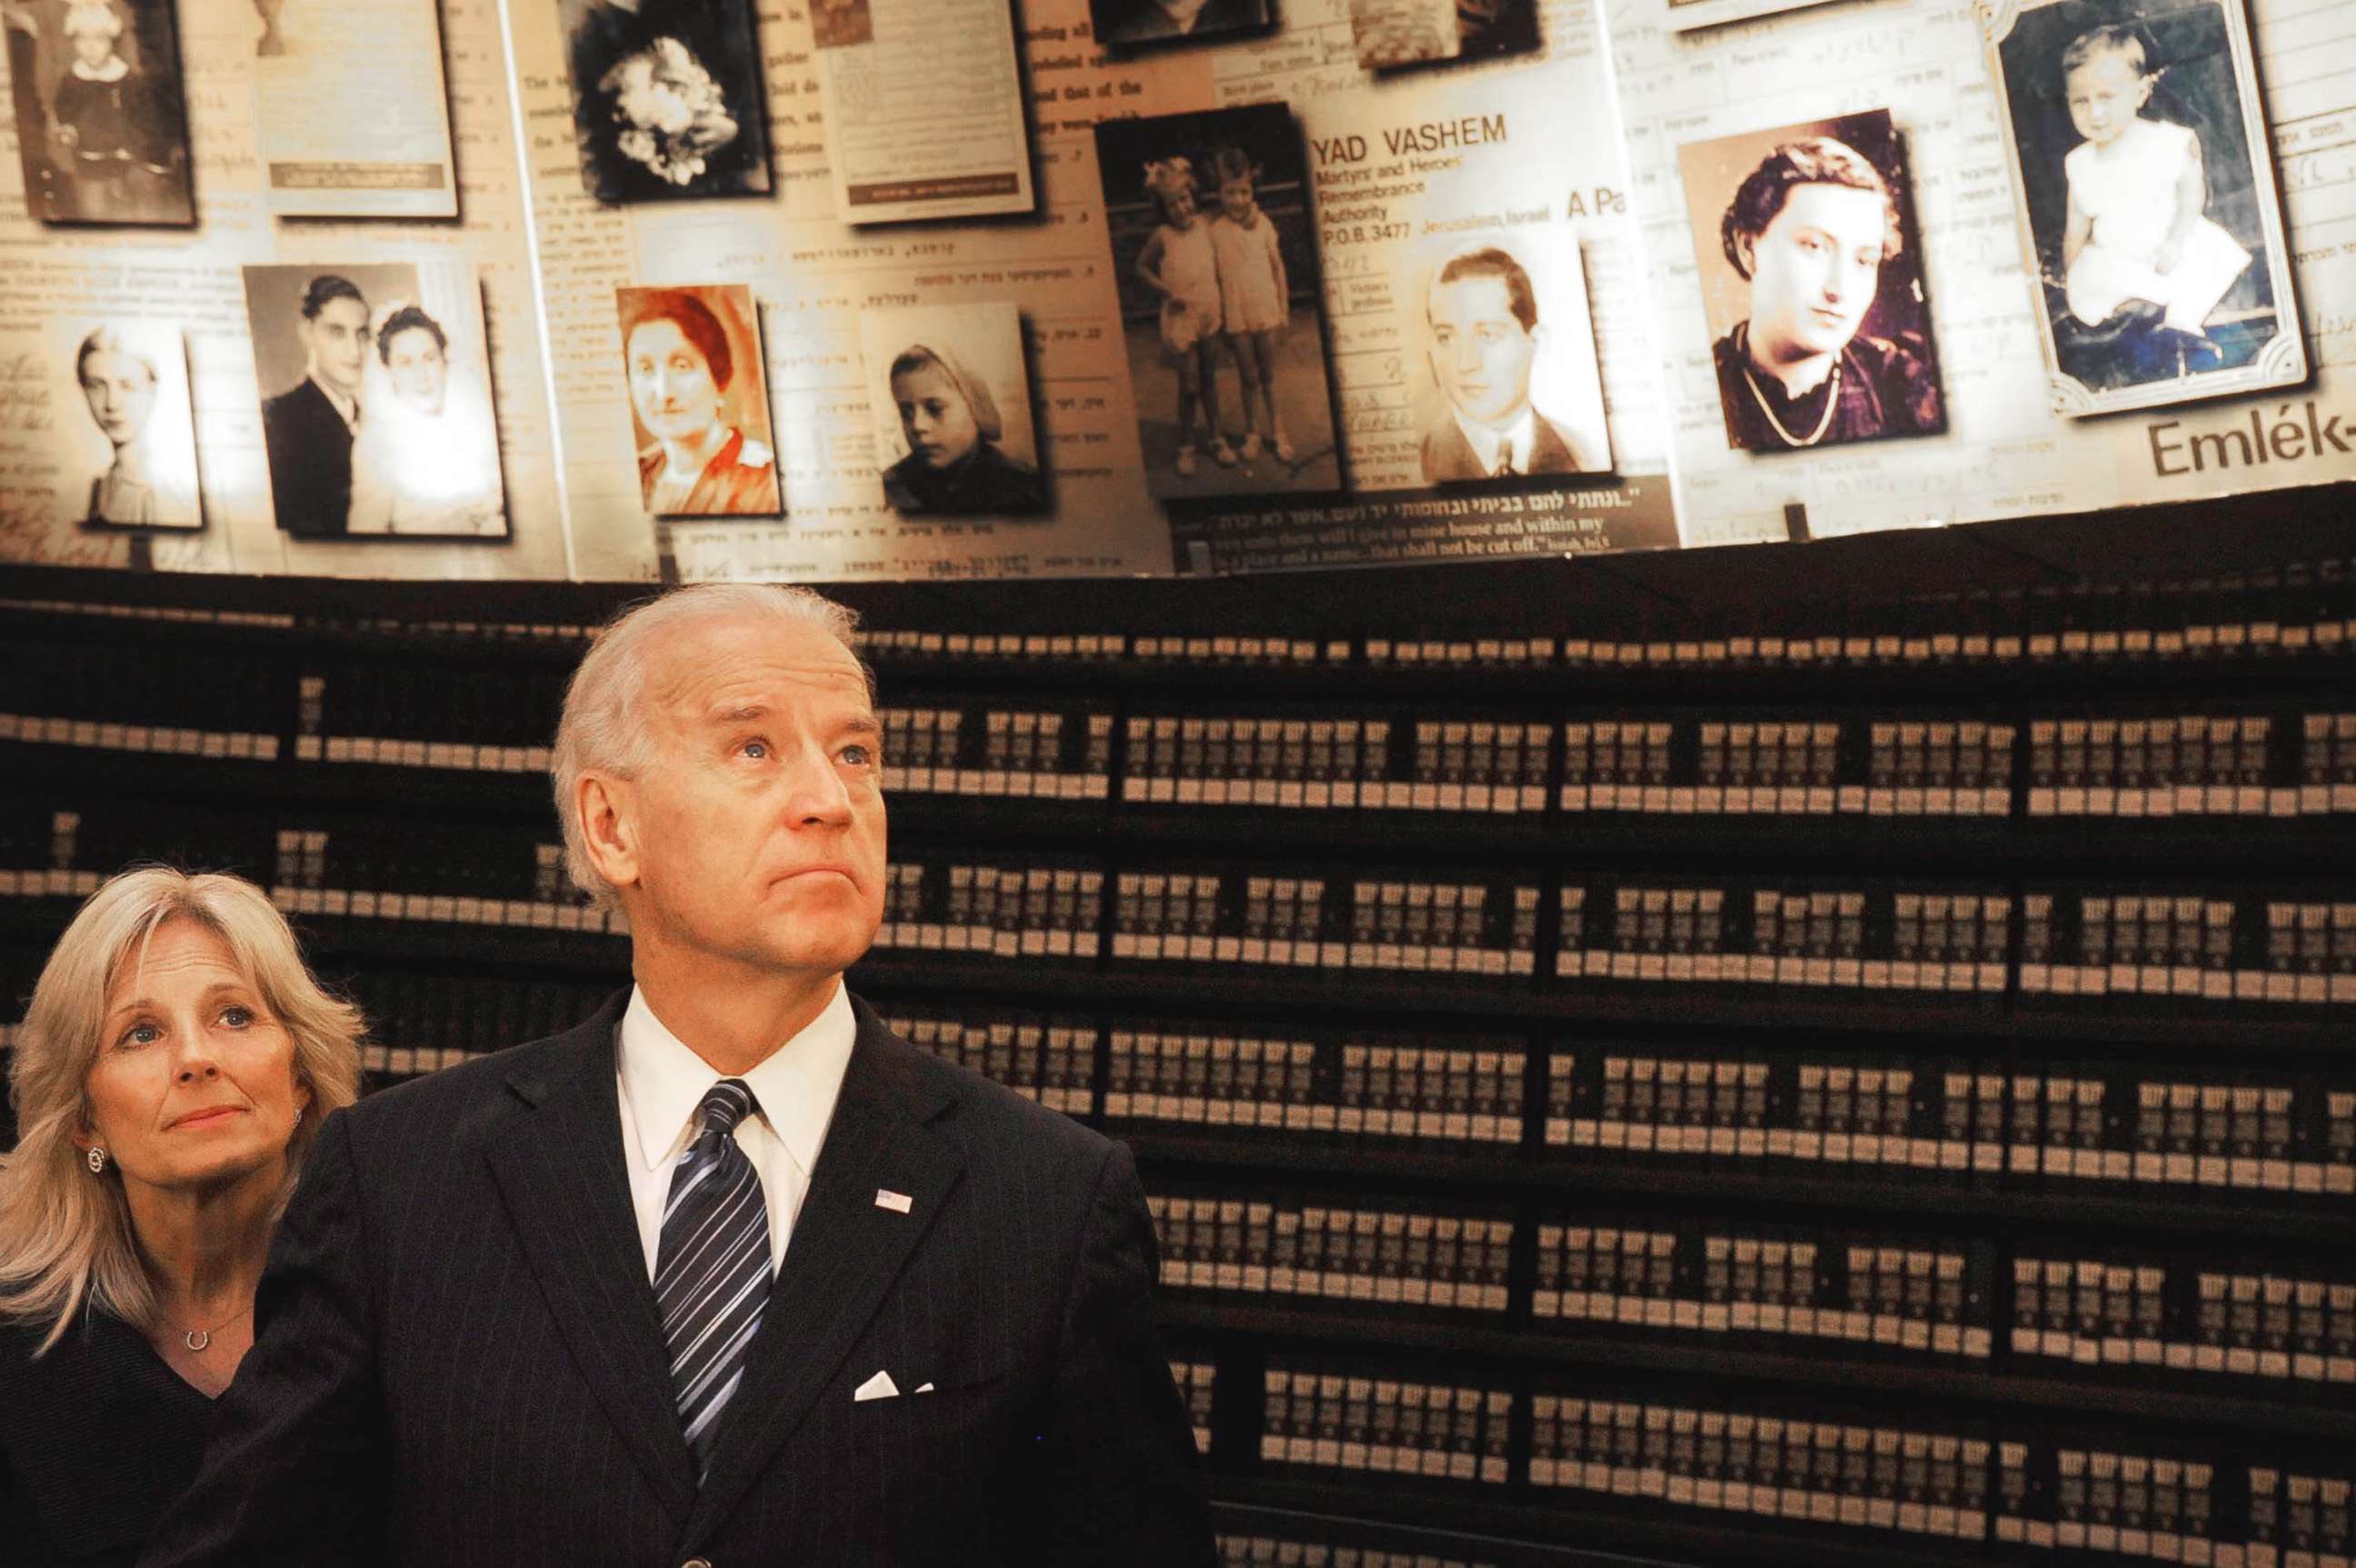 PHOTO: Vice-President Joe Biden and his wife, Dr. Jill Biden, look around at the names and photographs of murdered Jews as they visit the Hall of Names in the Yad Vashem Holocaust Memorial museum in Jerusalem, March 9, 2010.